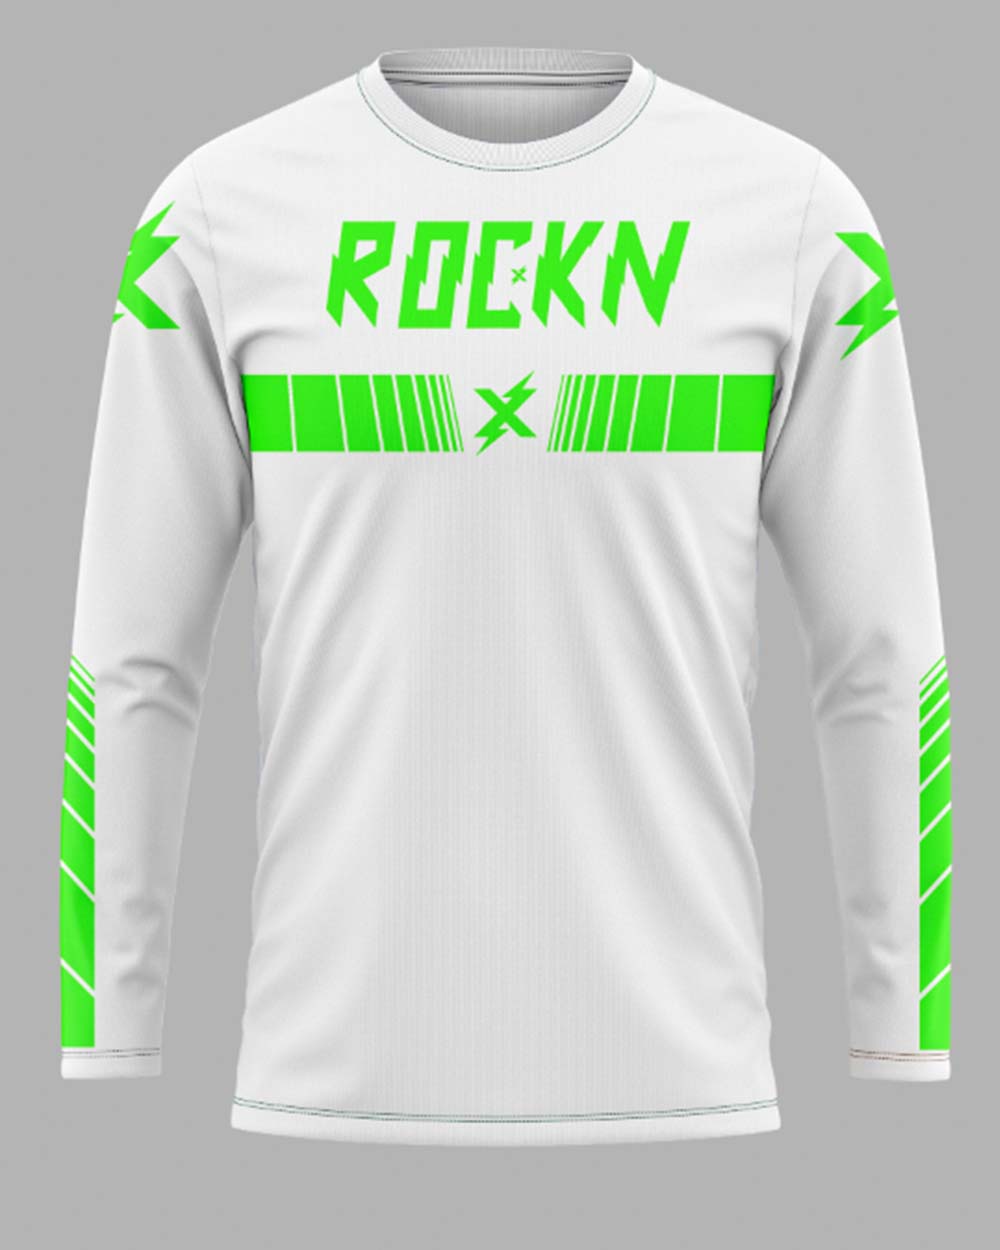 Speed Lines White/Green Set - FREE Custom Sublimation